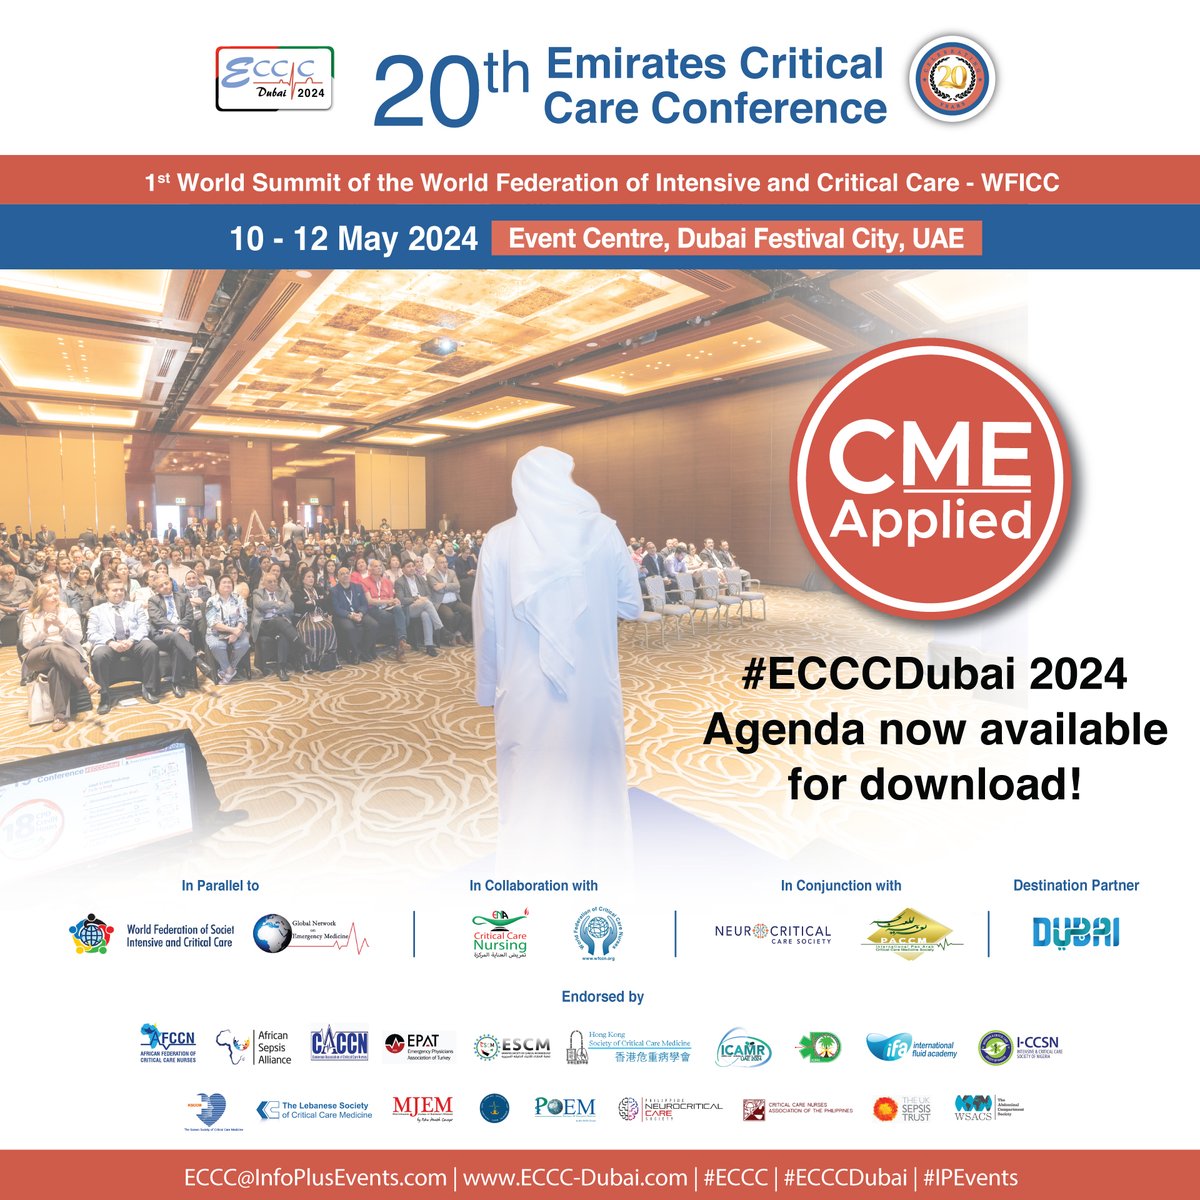 #ECCCDubai 2024 Agenda is now available for download @ bit.ly/ECCCPg #nurses #medicaltraining #medicalcourses #sonography #ultrasound #echocardiography #qualityandsafety #CriticalCareConference #IPEvents